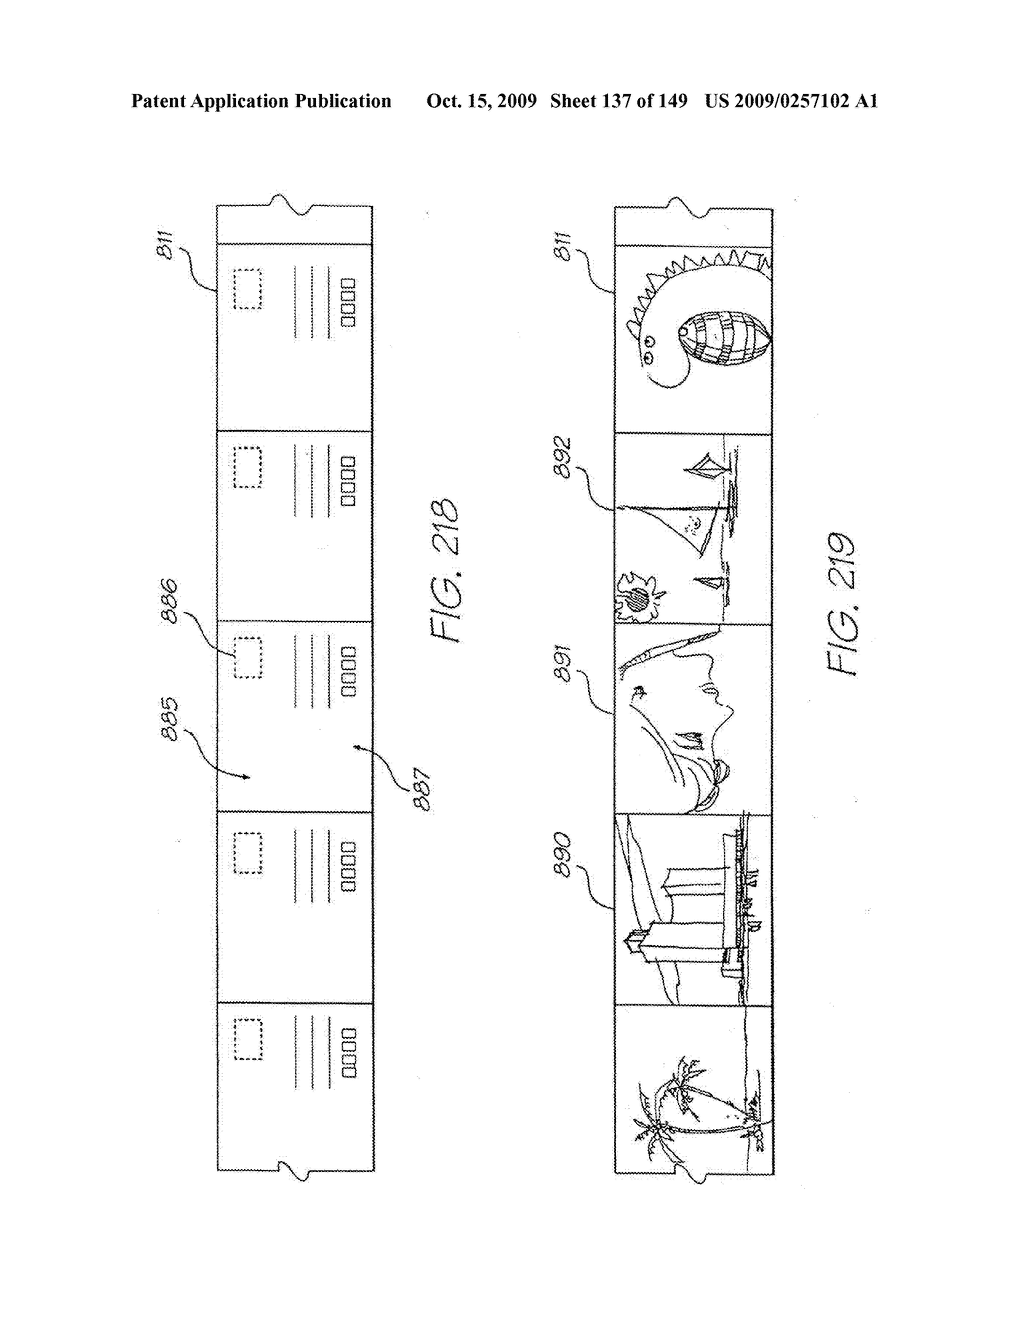 IMAGE PROCESSING APPARATUS HAVING CARD READER FOR APPLYING EFFECTS STORED ON A CARD TO A STORED IMAGE - diagram, schematic, and image 138